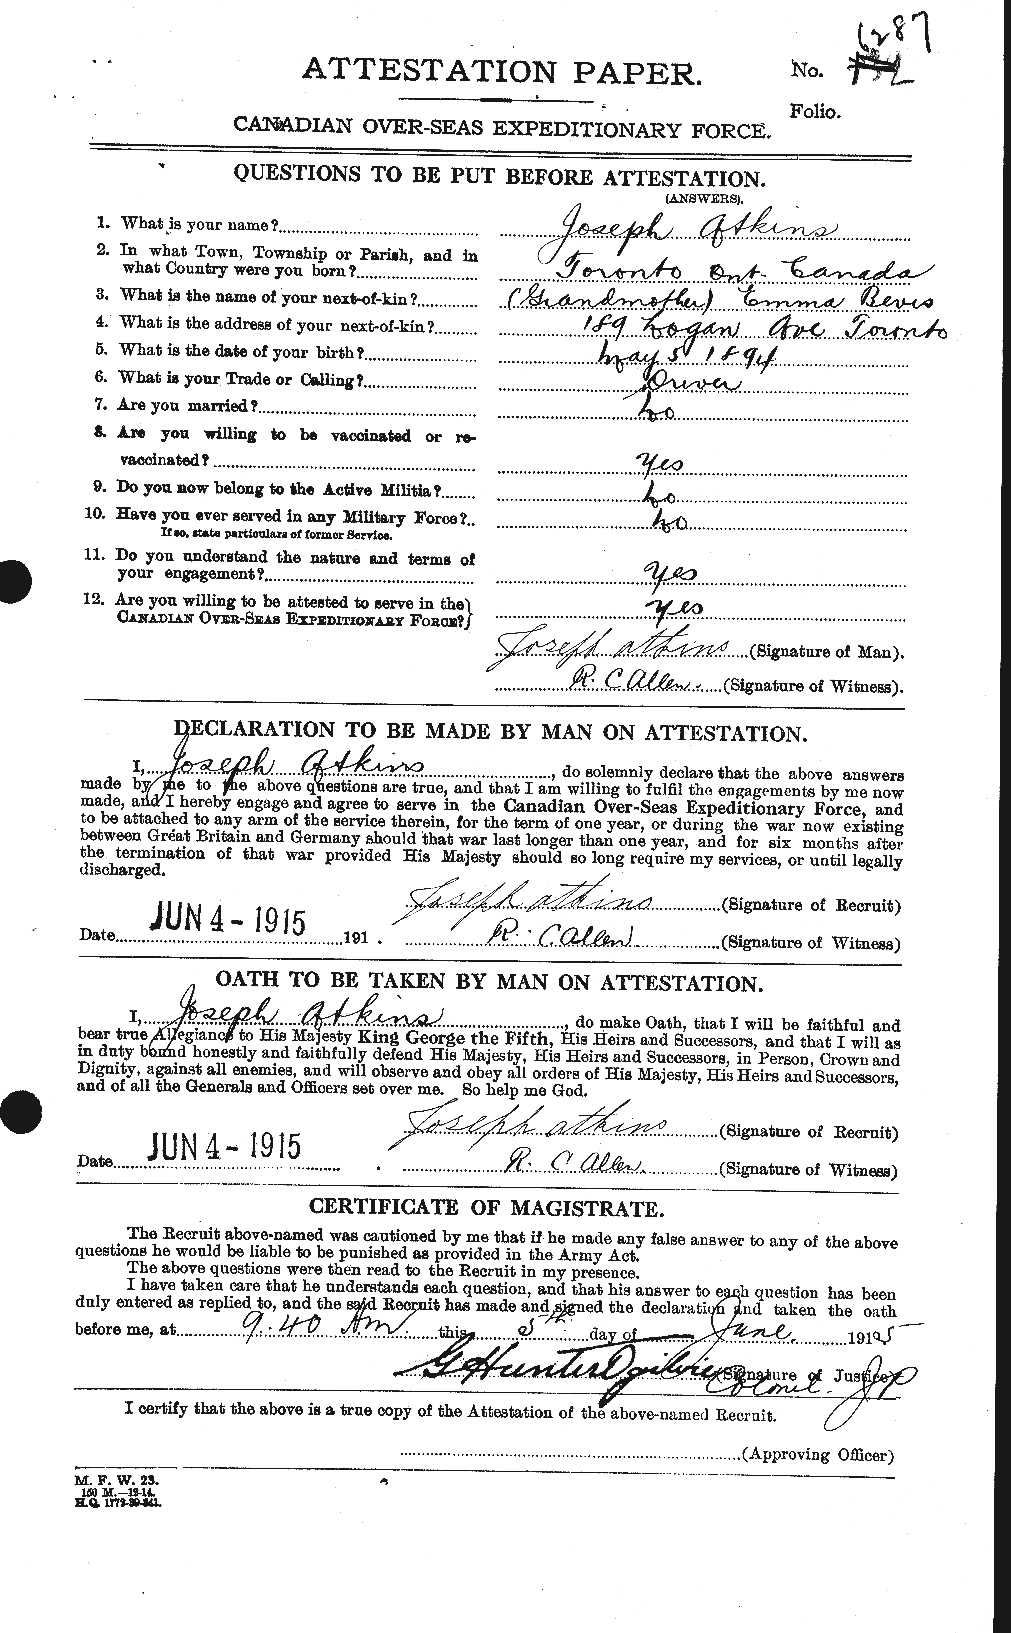 Personnel Records of the First World War - CEF 216812a